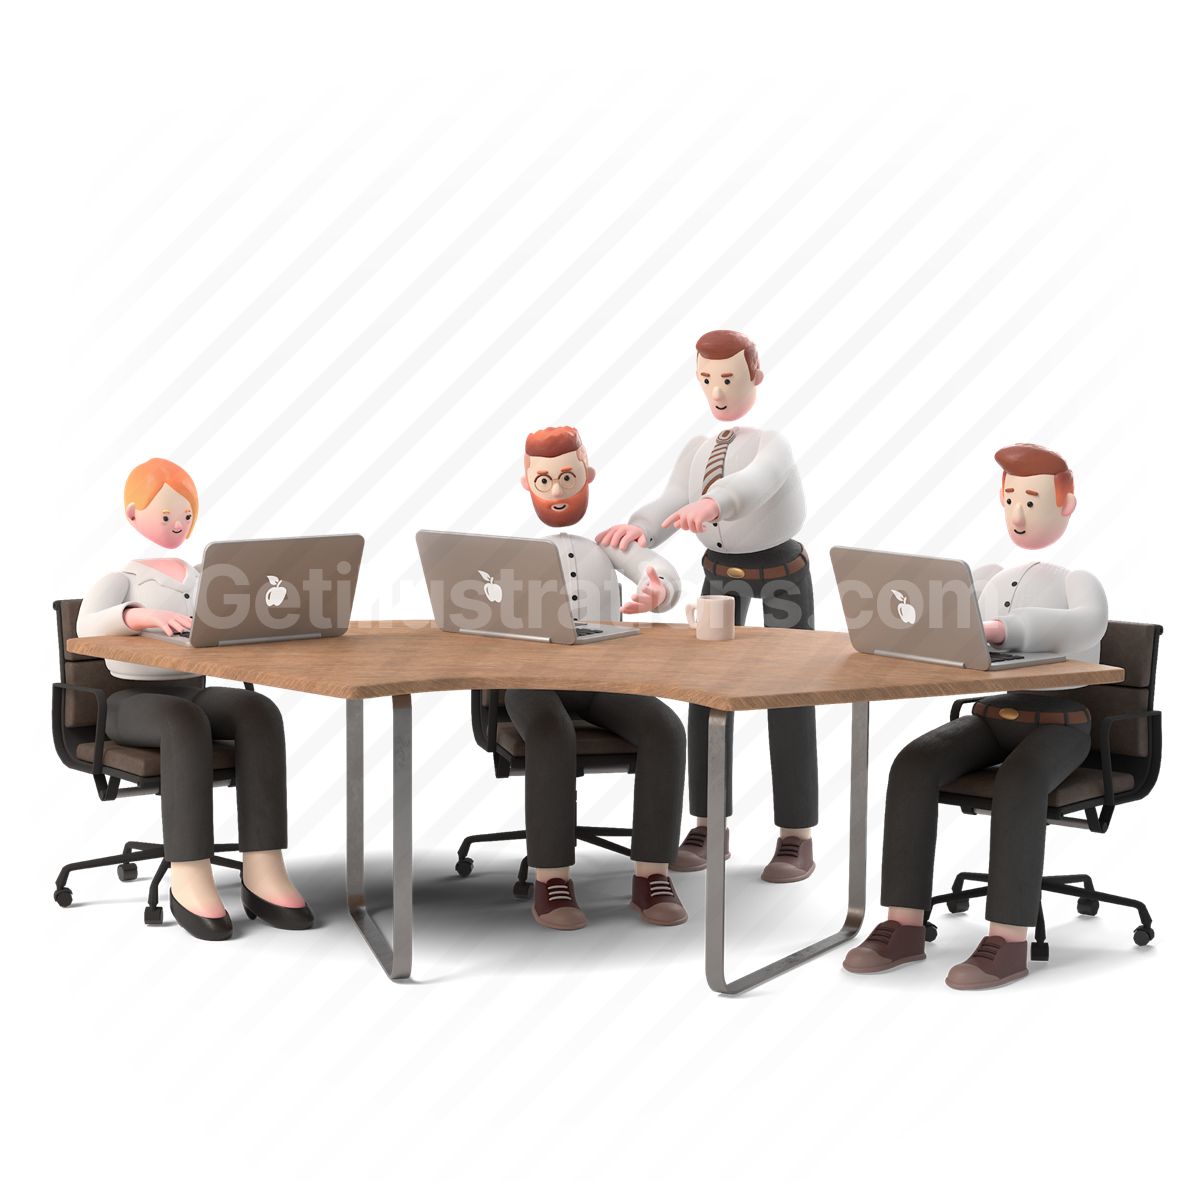 office, 3d, people, person, team, working together, work, teamwork